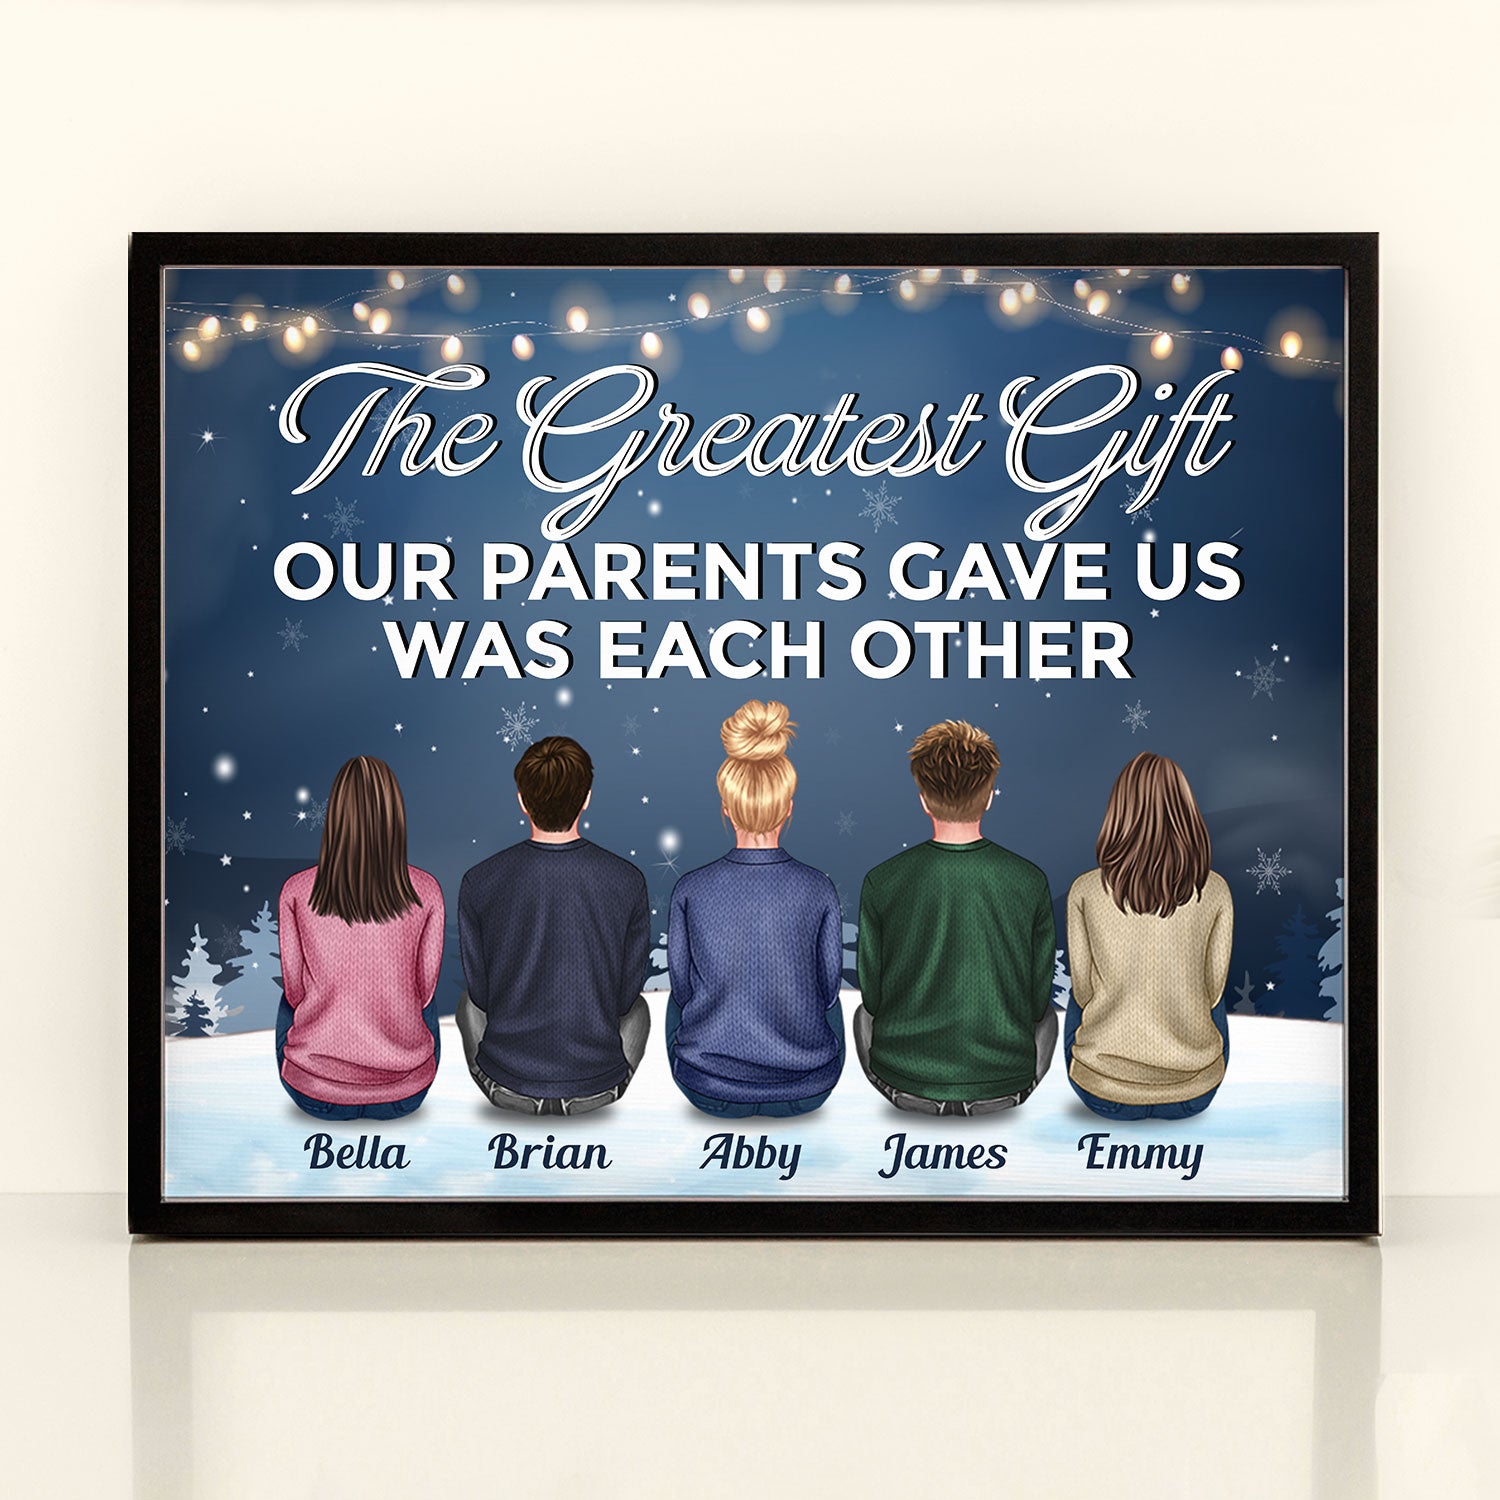 The Love Of Brothers & Sisters Is Forever - Personalized Poster - Christmas Gift For Siblings, Brothers & Sisters